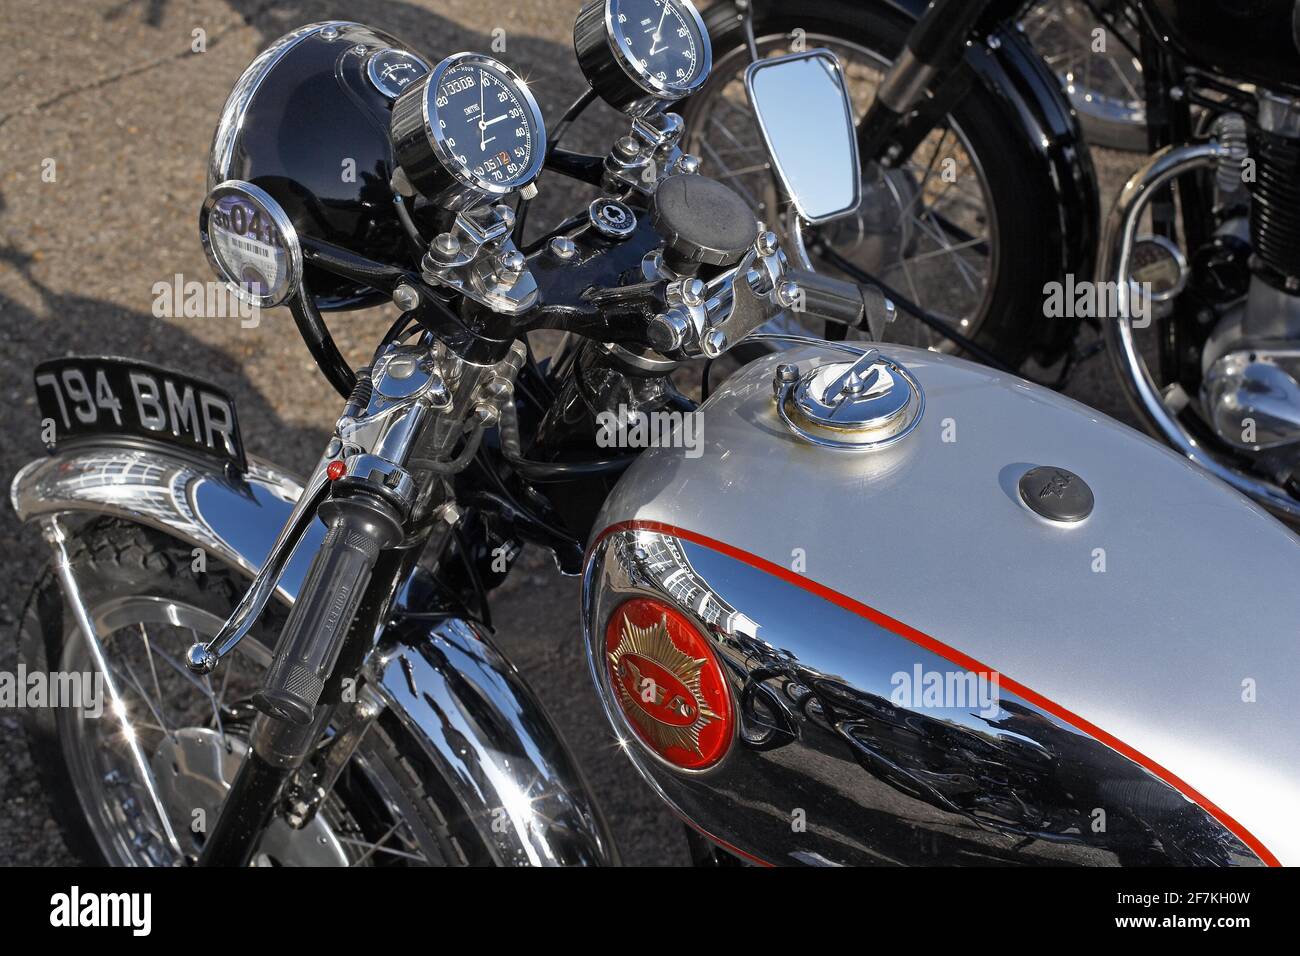 Close up of classic BSA motorcycle at Ton up Day, Jacks Hill Cafe, Towcester, Northamptonshire, England. Stock Photo